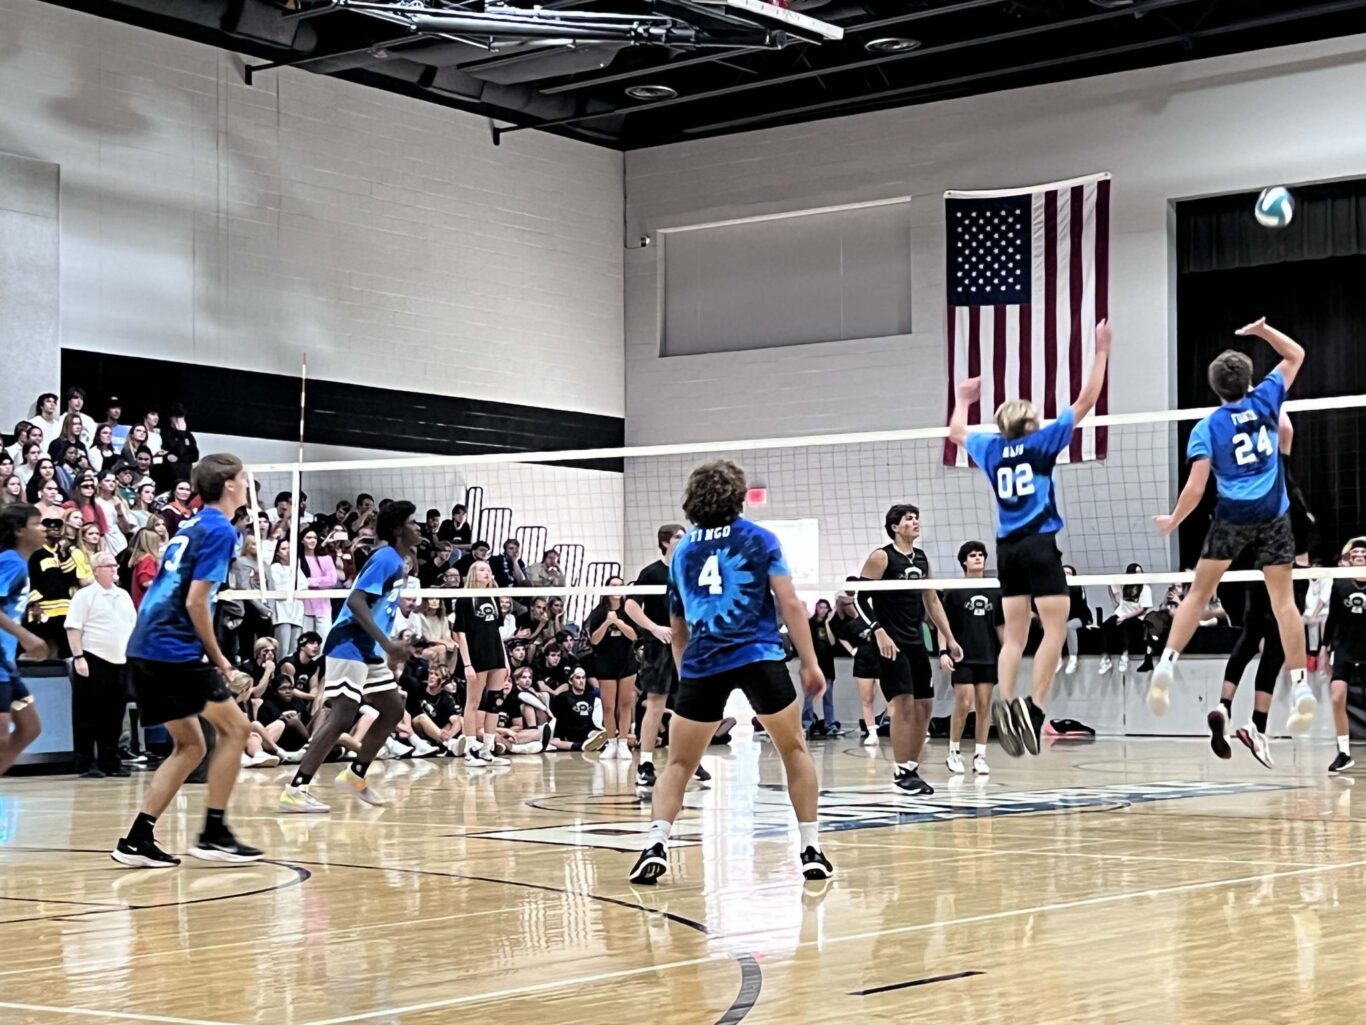 A group of people playing volleyball in a gym during Homecoming.